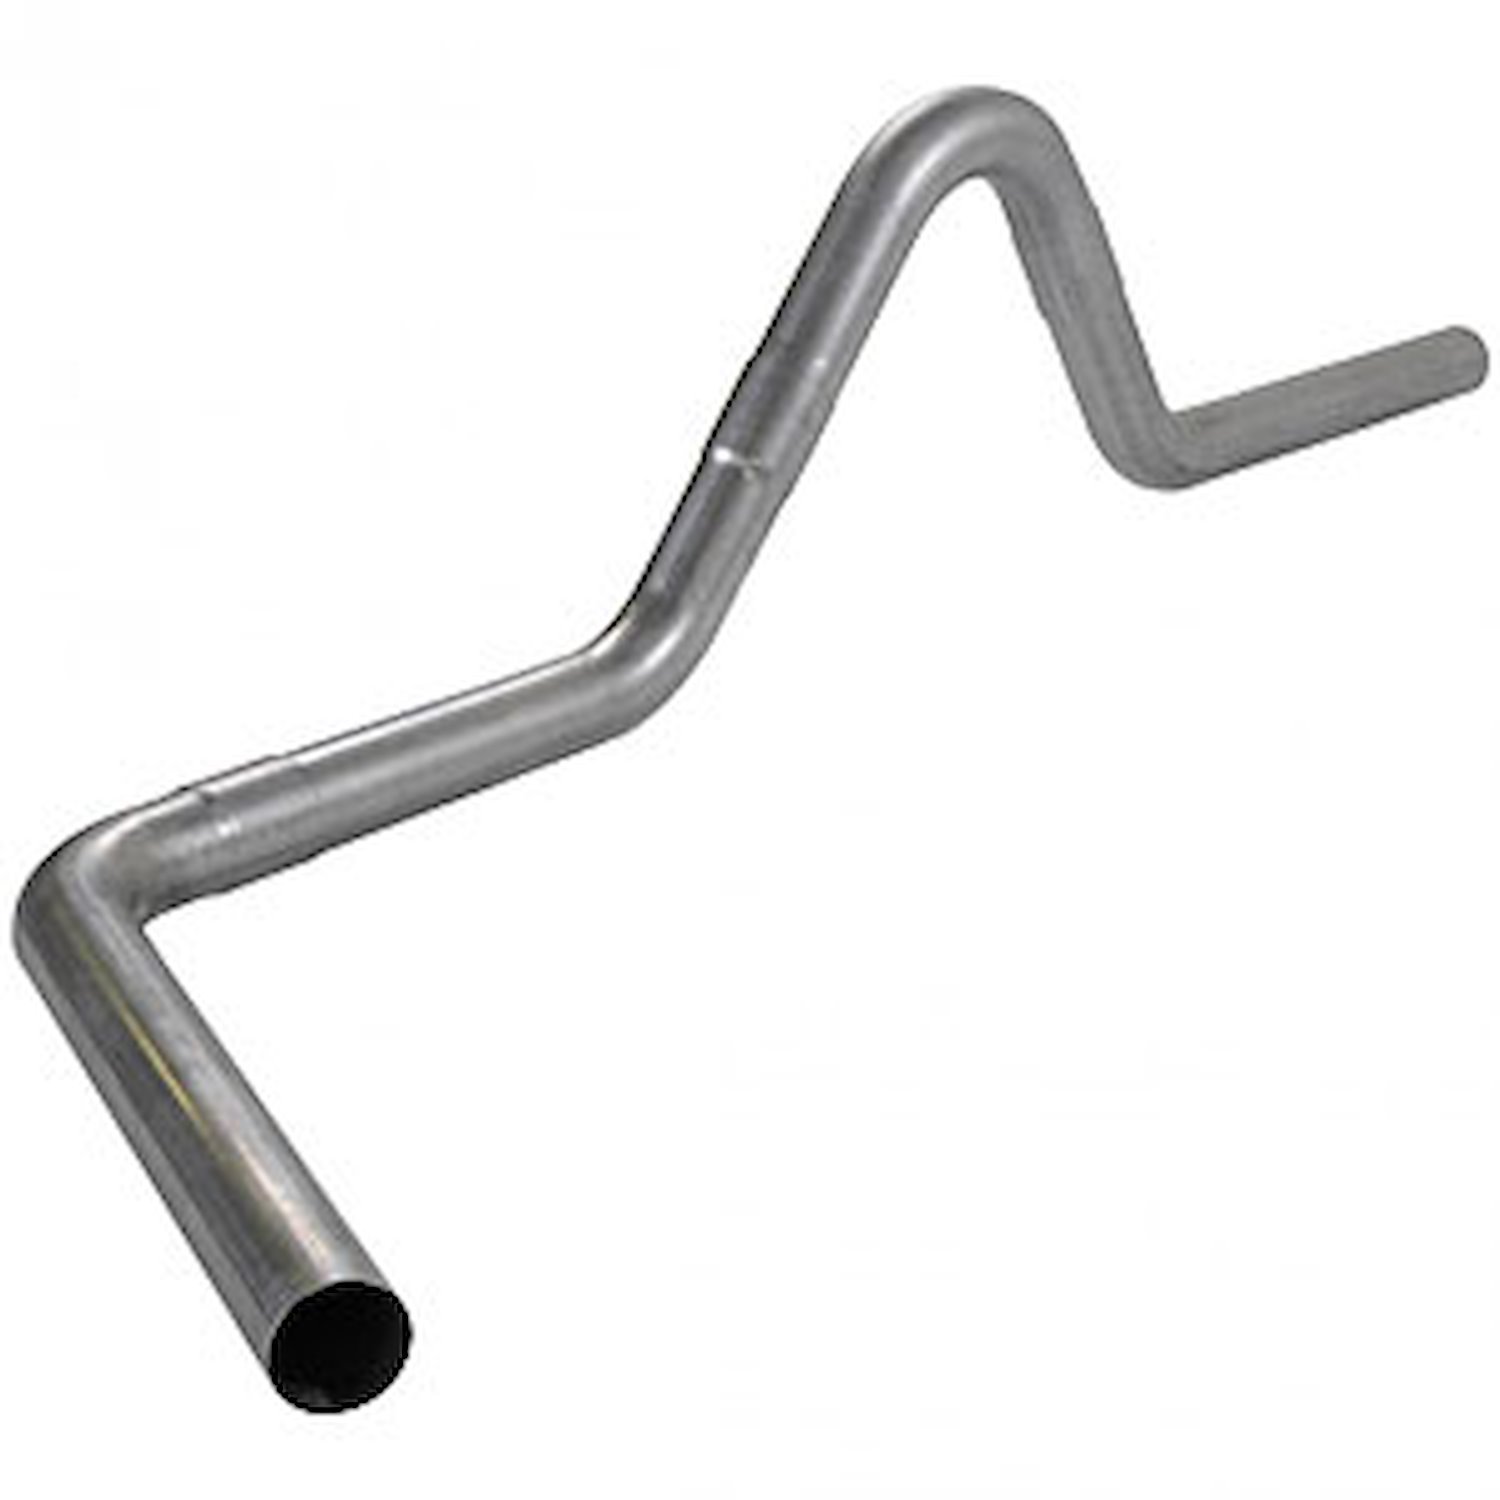 Flowmaster Tailpipe Stainless Steel Left Rear Section Replacement